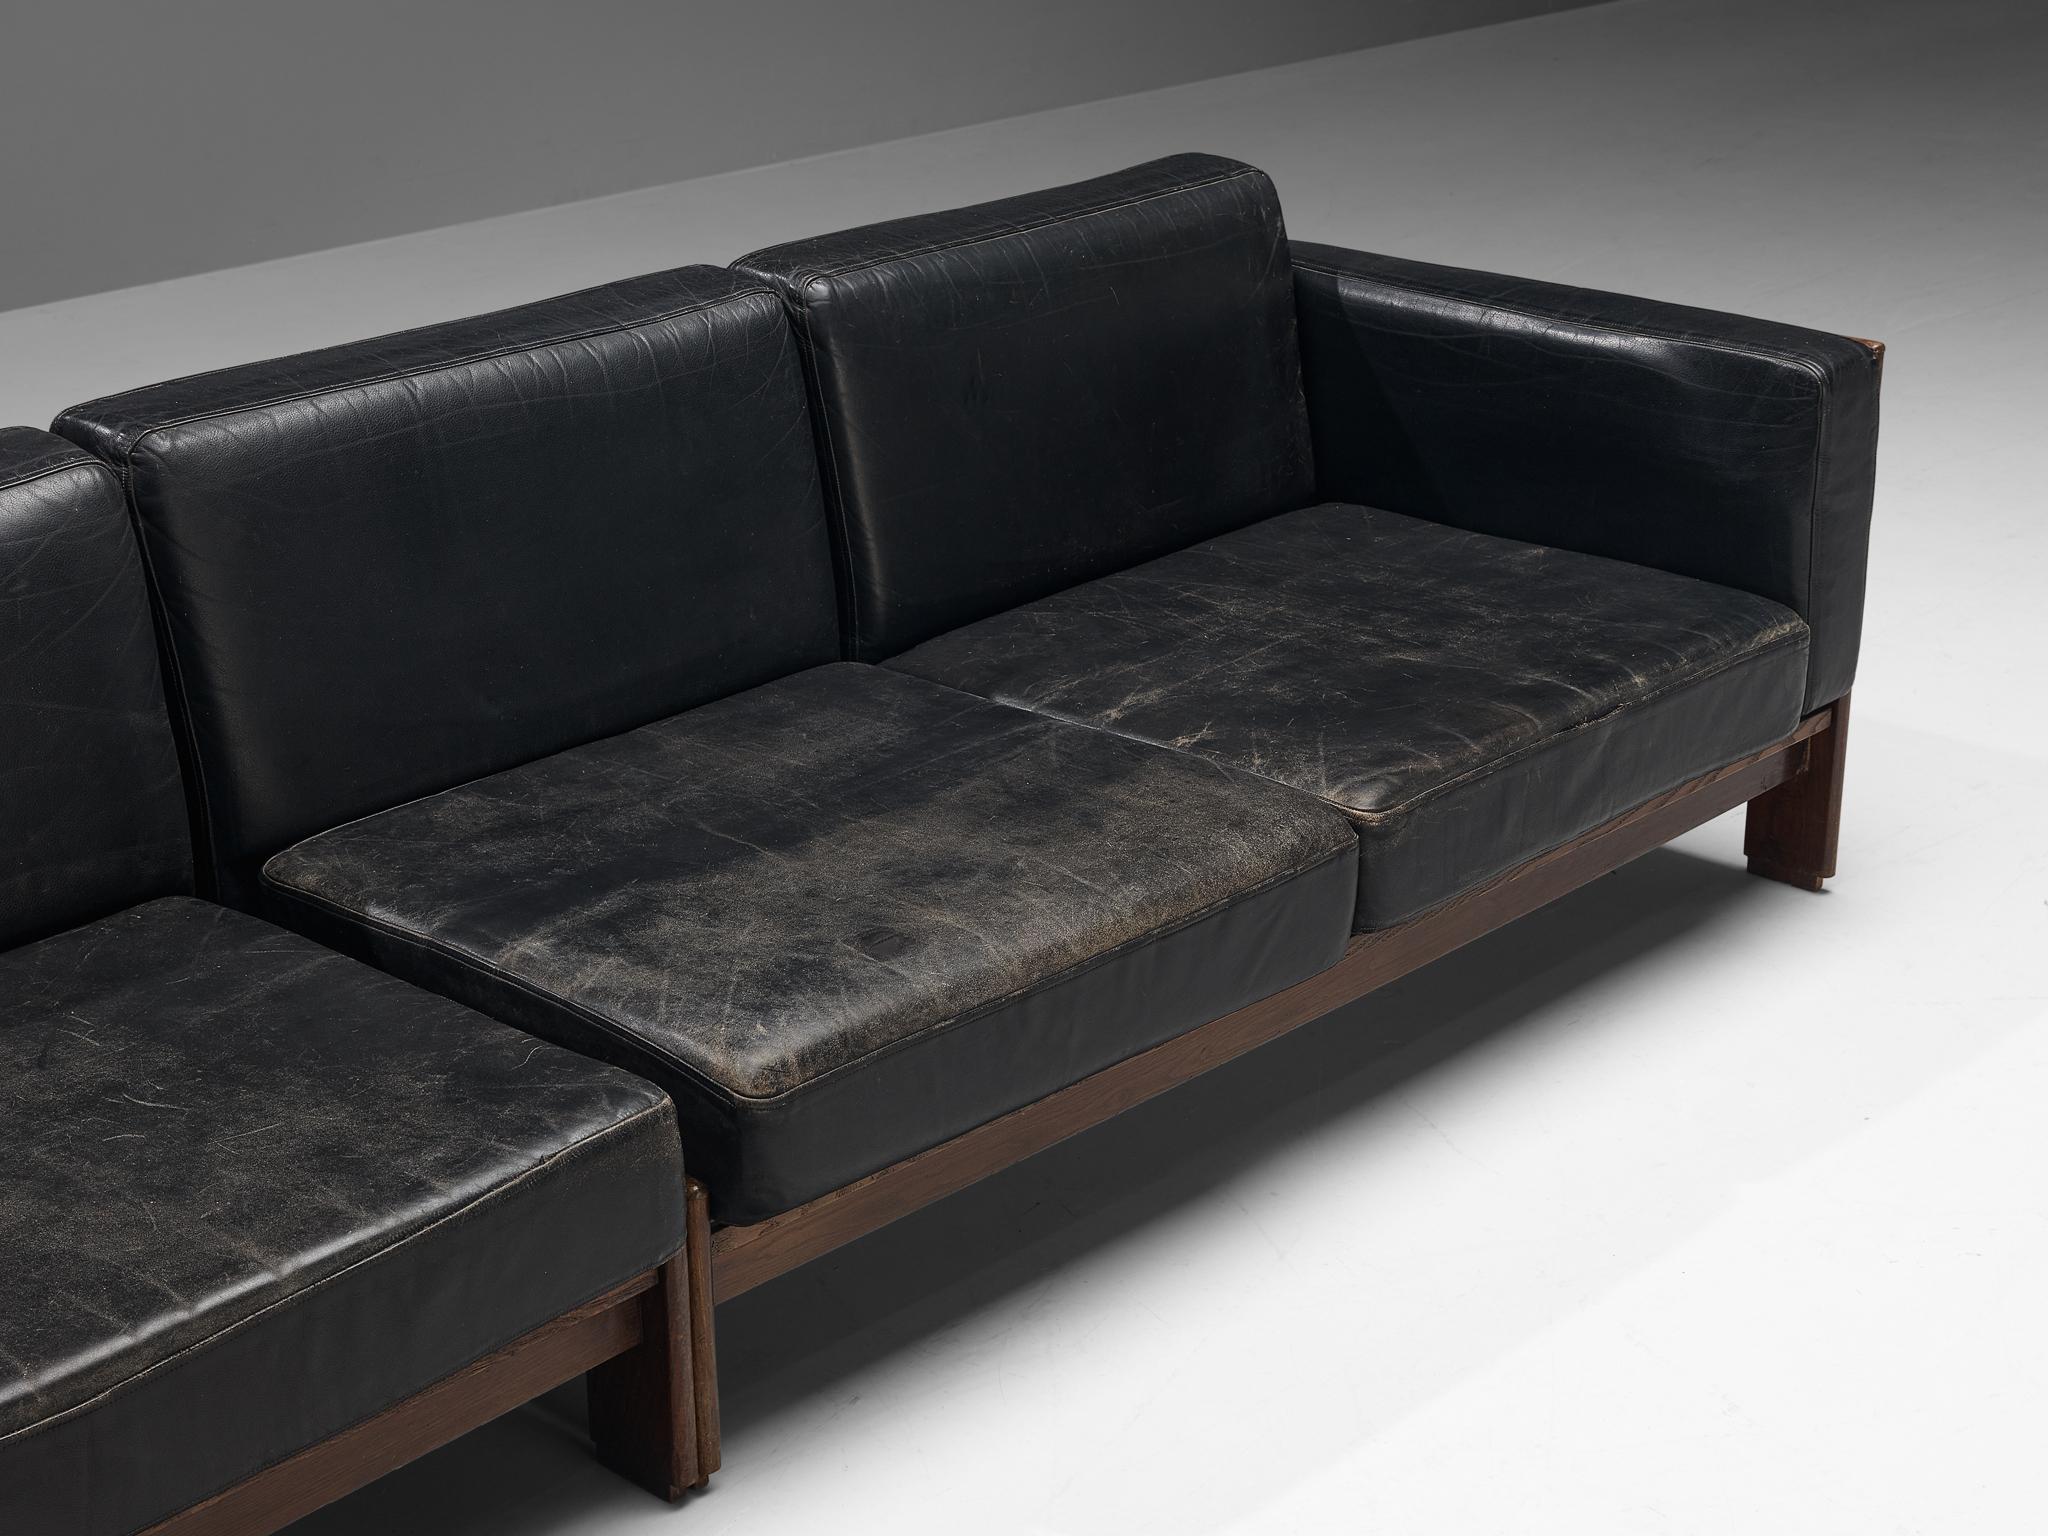 European Italian Mid-Century Modern Sofa in Ash and Black Leather  For Sale